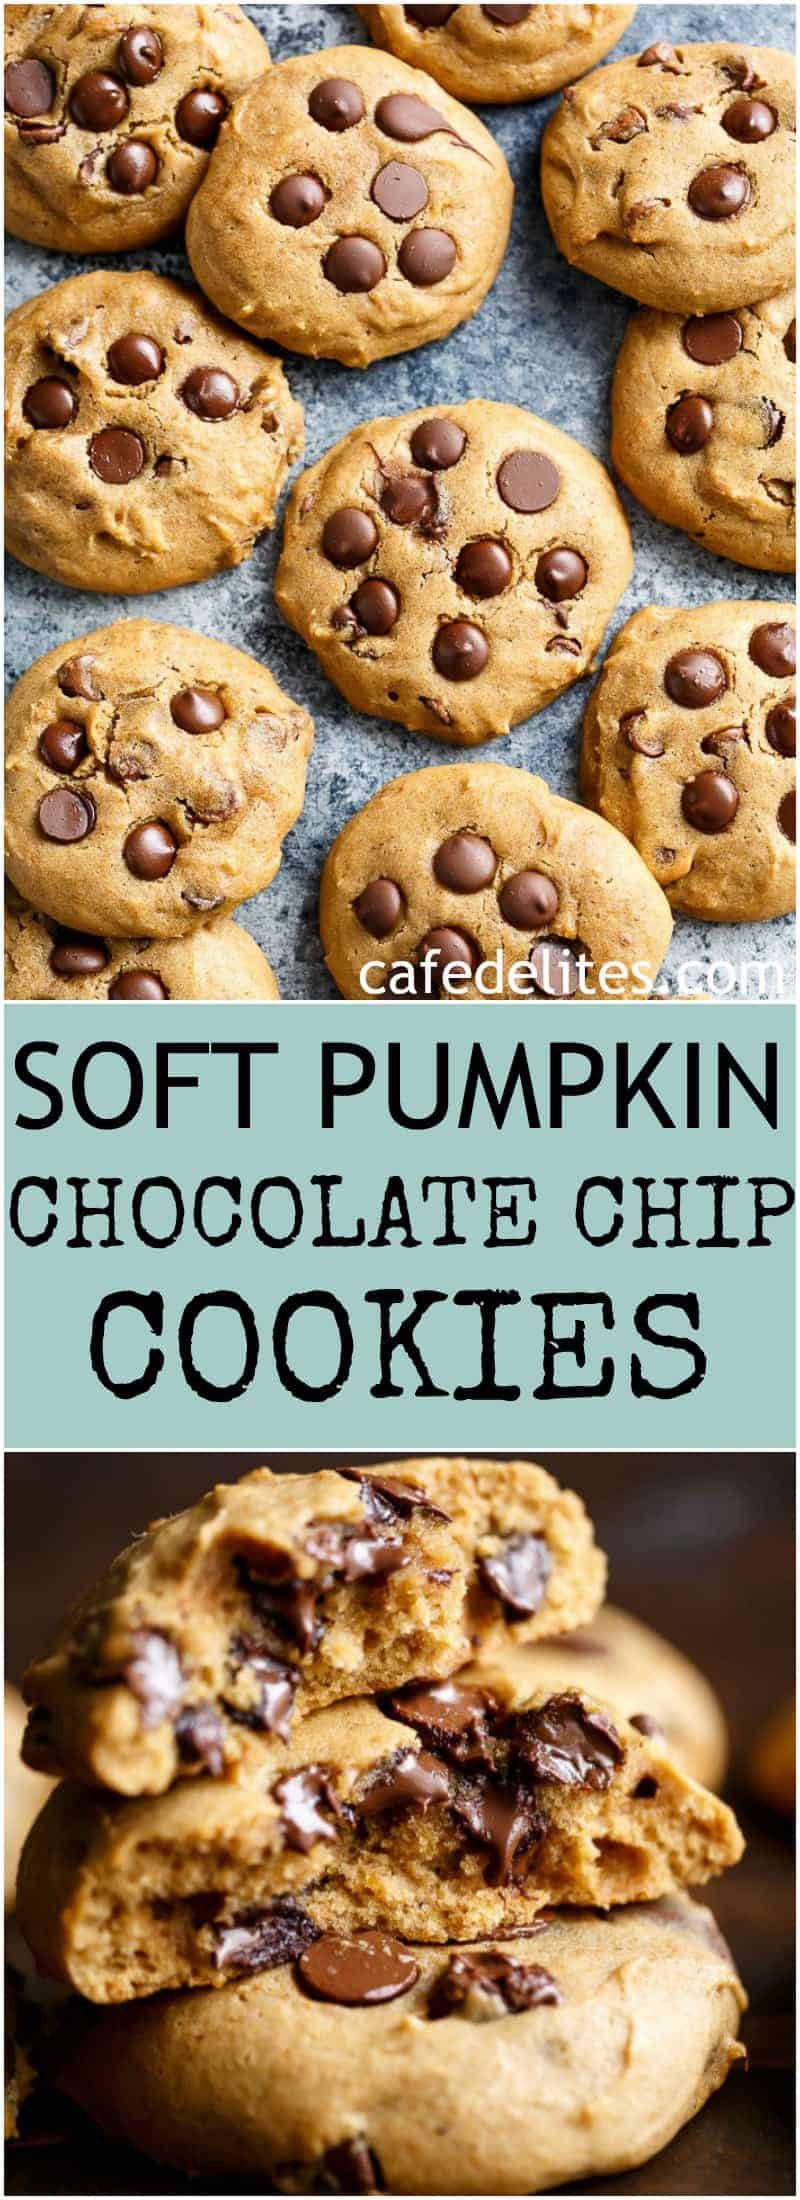 Soft Pumpkin Chocolate Chip Cookies are crispy on the edges and soft and chewy in the centre! The perfect cookie for the season! | https://cafedelites.com